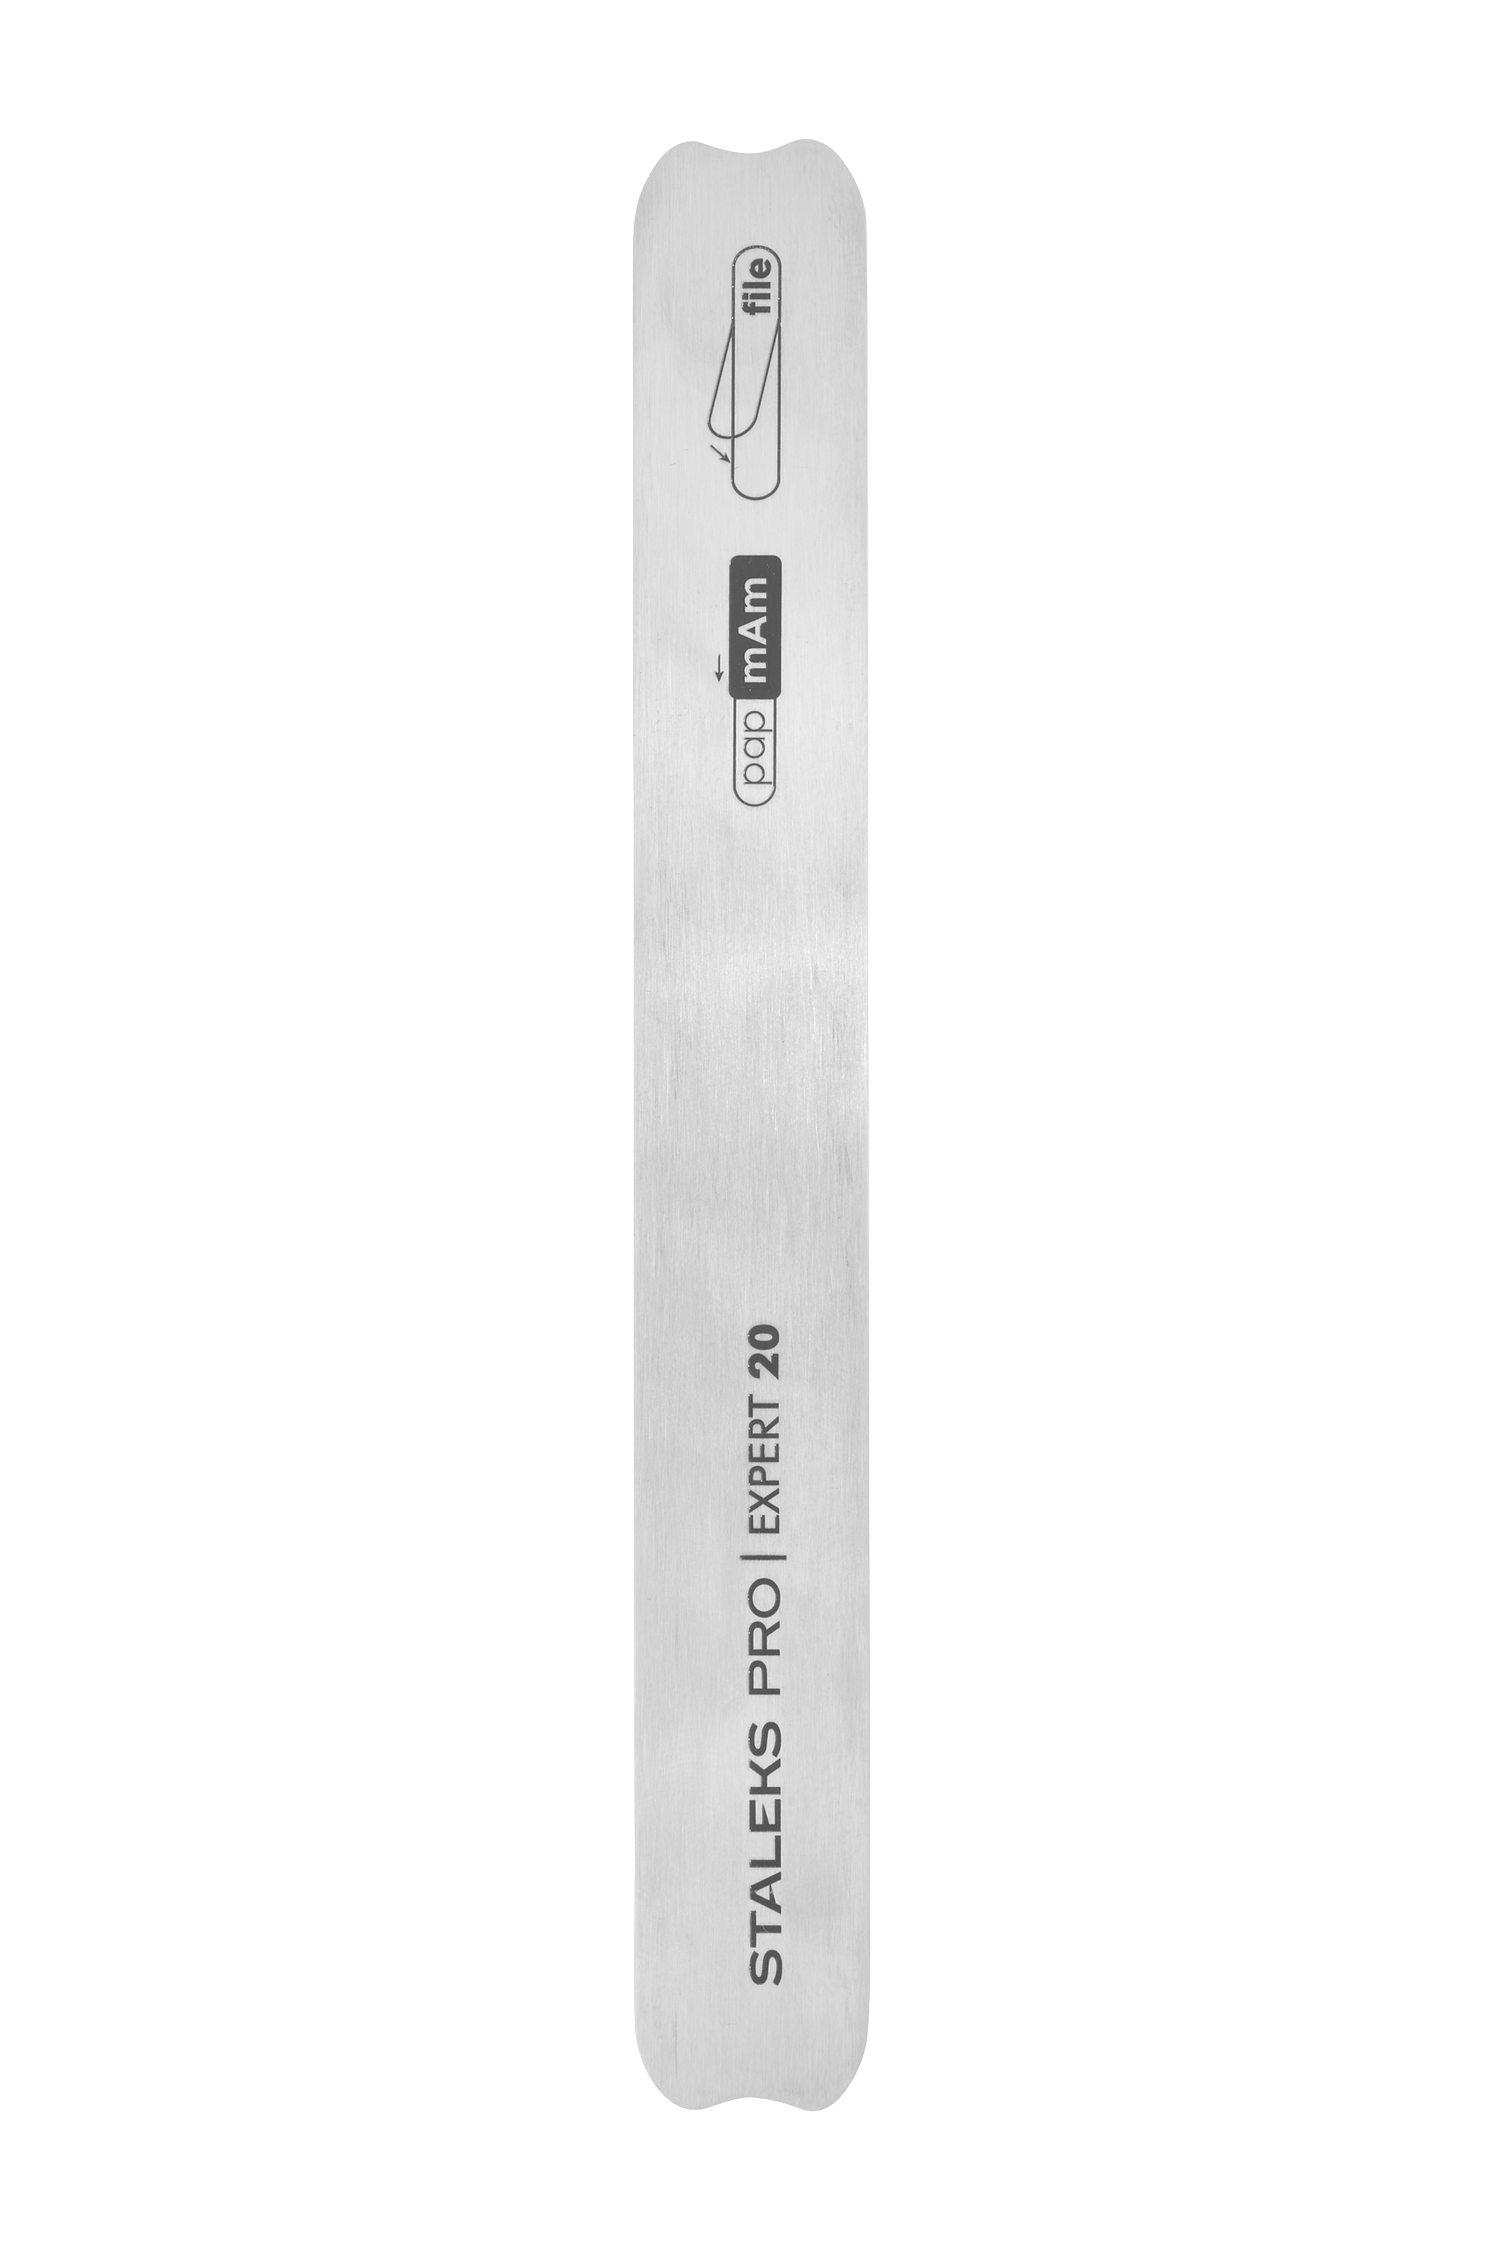 Nail file metal straight (base) EXPERT 20 complete with replaceable file-cover 180 grit Staleks